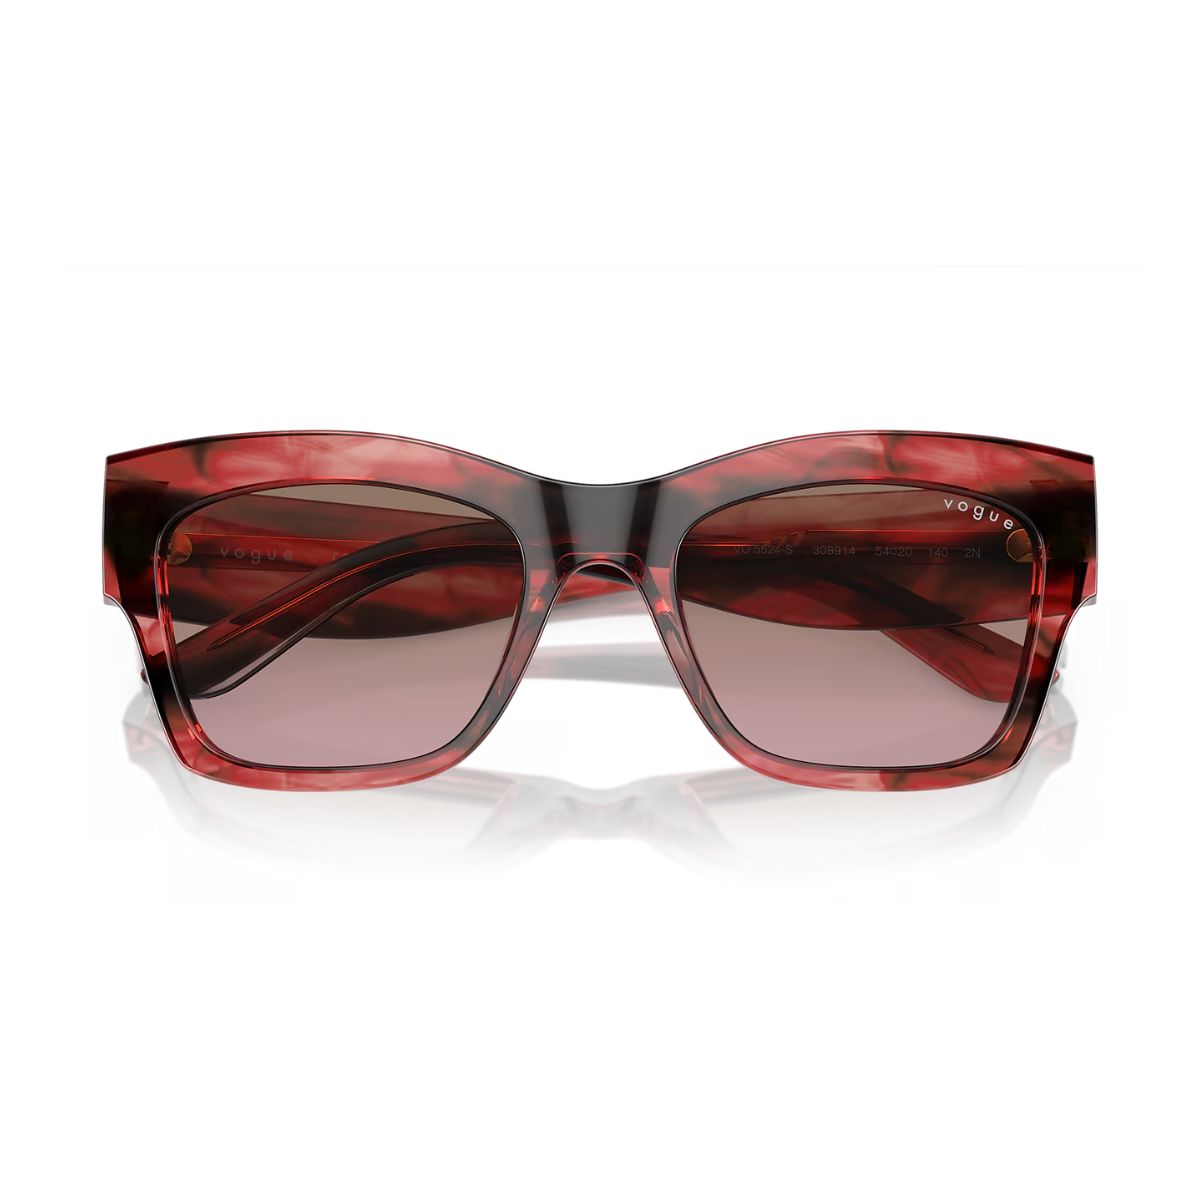 "Shop Stylish Vouge Red Color Rectangle UV Protection Sunglasses For Women's At Optorium"